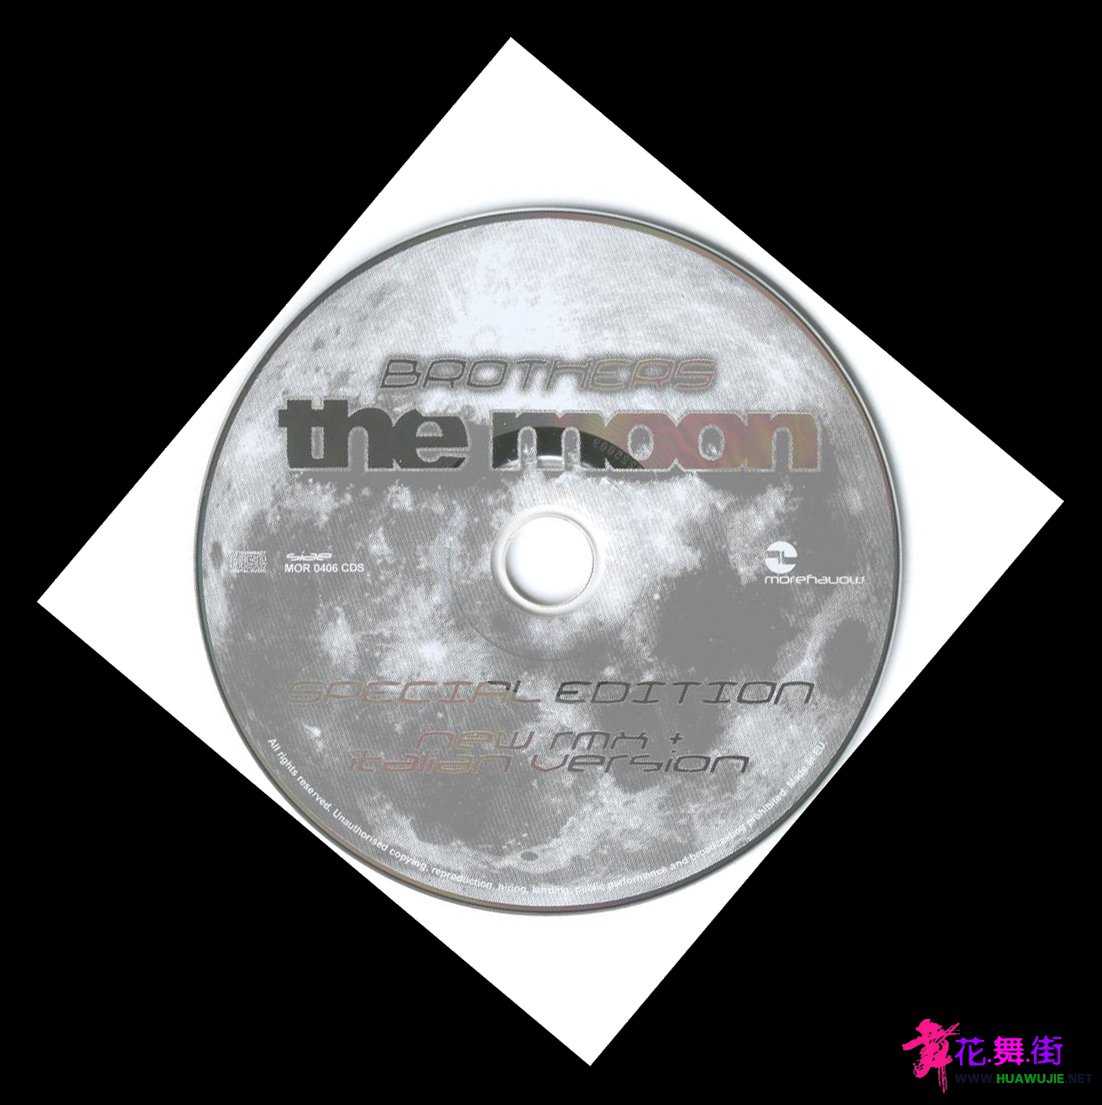 00-brothers-the_moon_(new_rmx_and_italian_version)-limited_edition-cdm-2004-bwa-cd.jpg